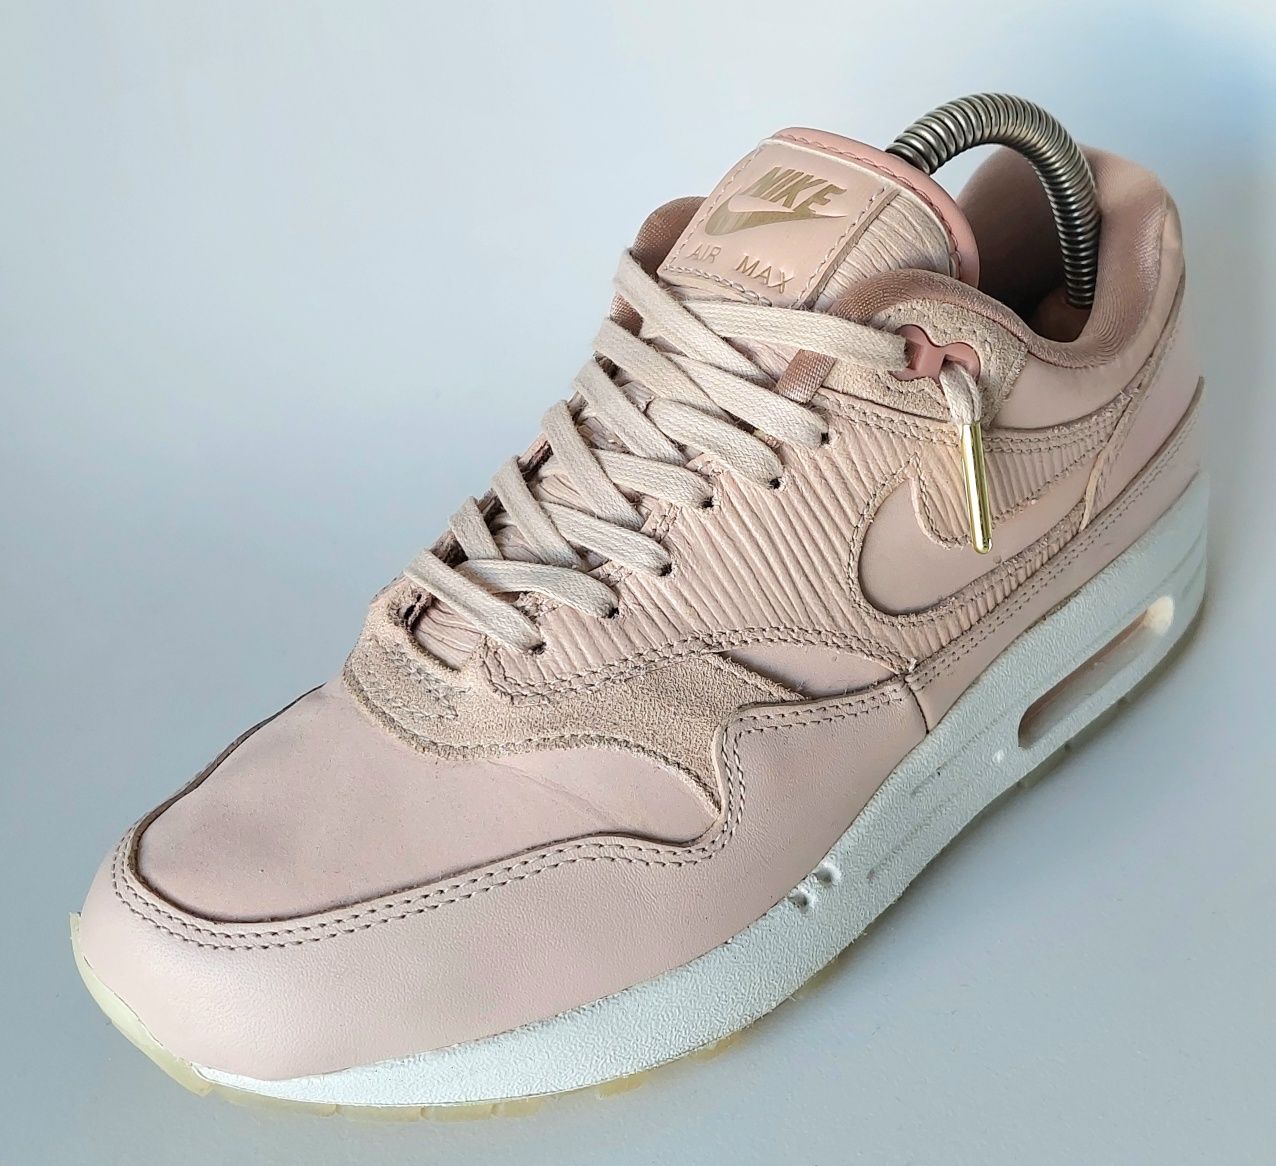 Buty Nike Air Max 1 Particle Beige roz.36,5 Limited